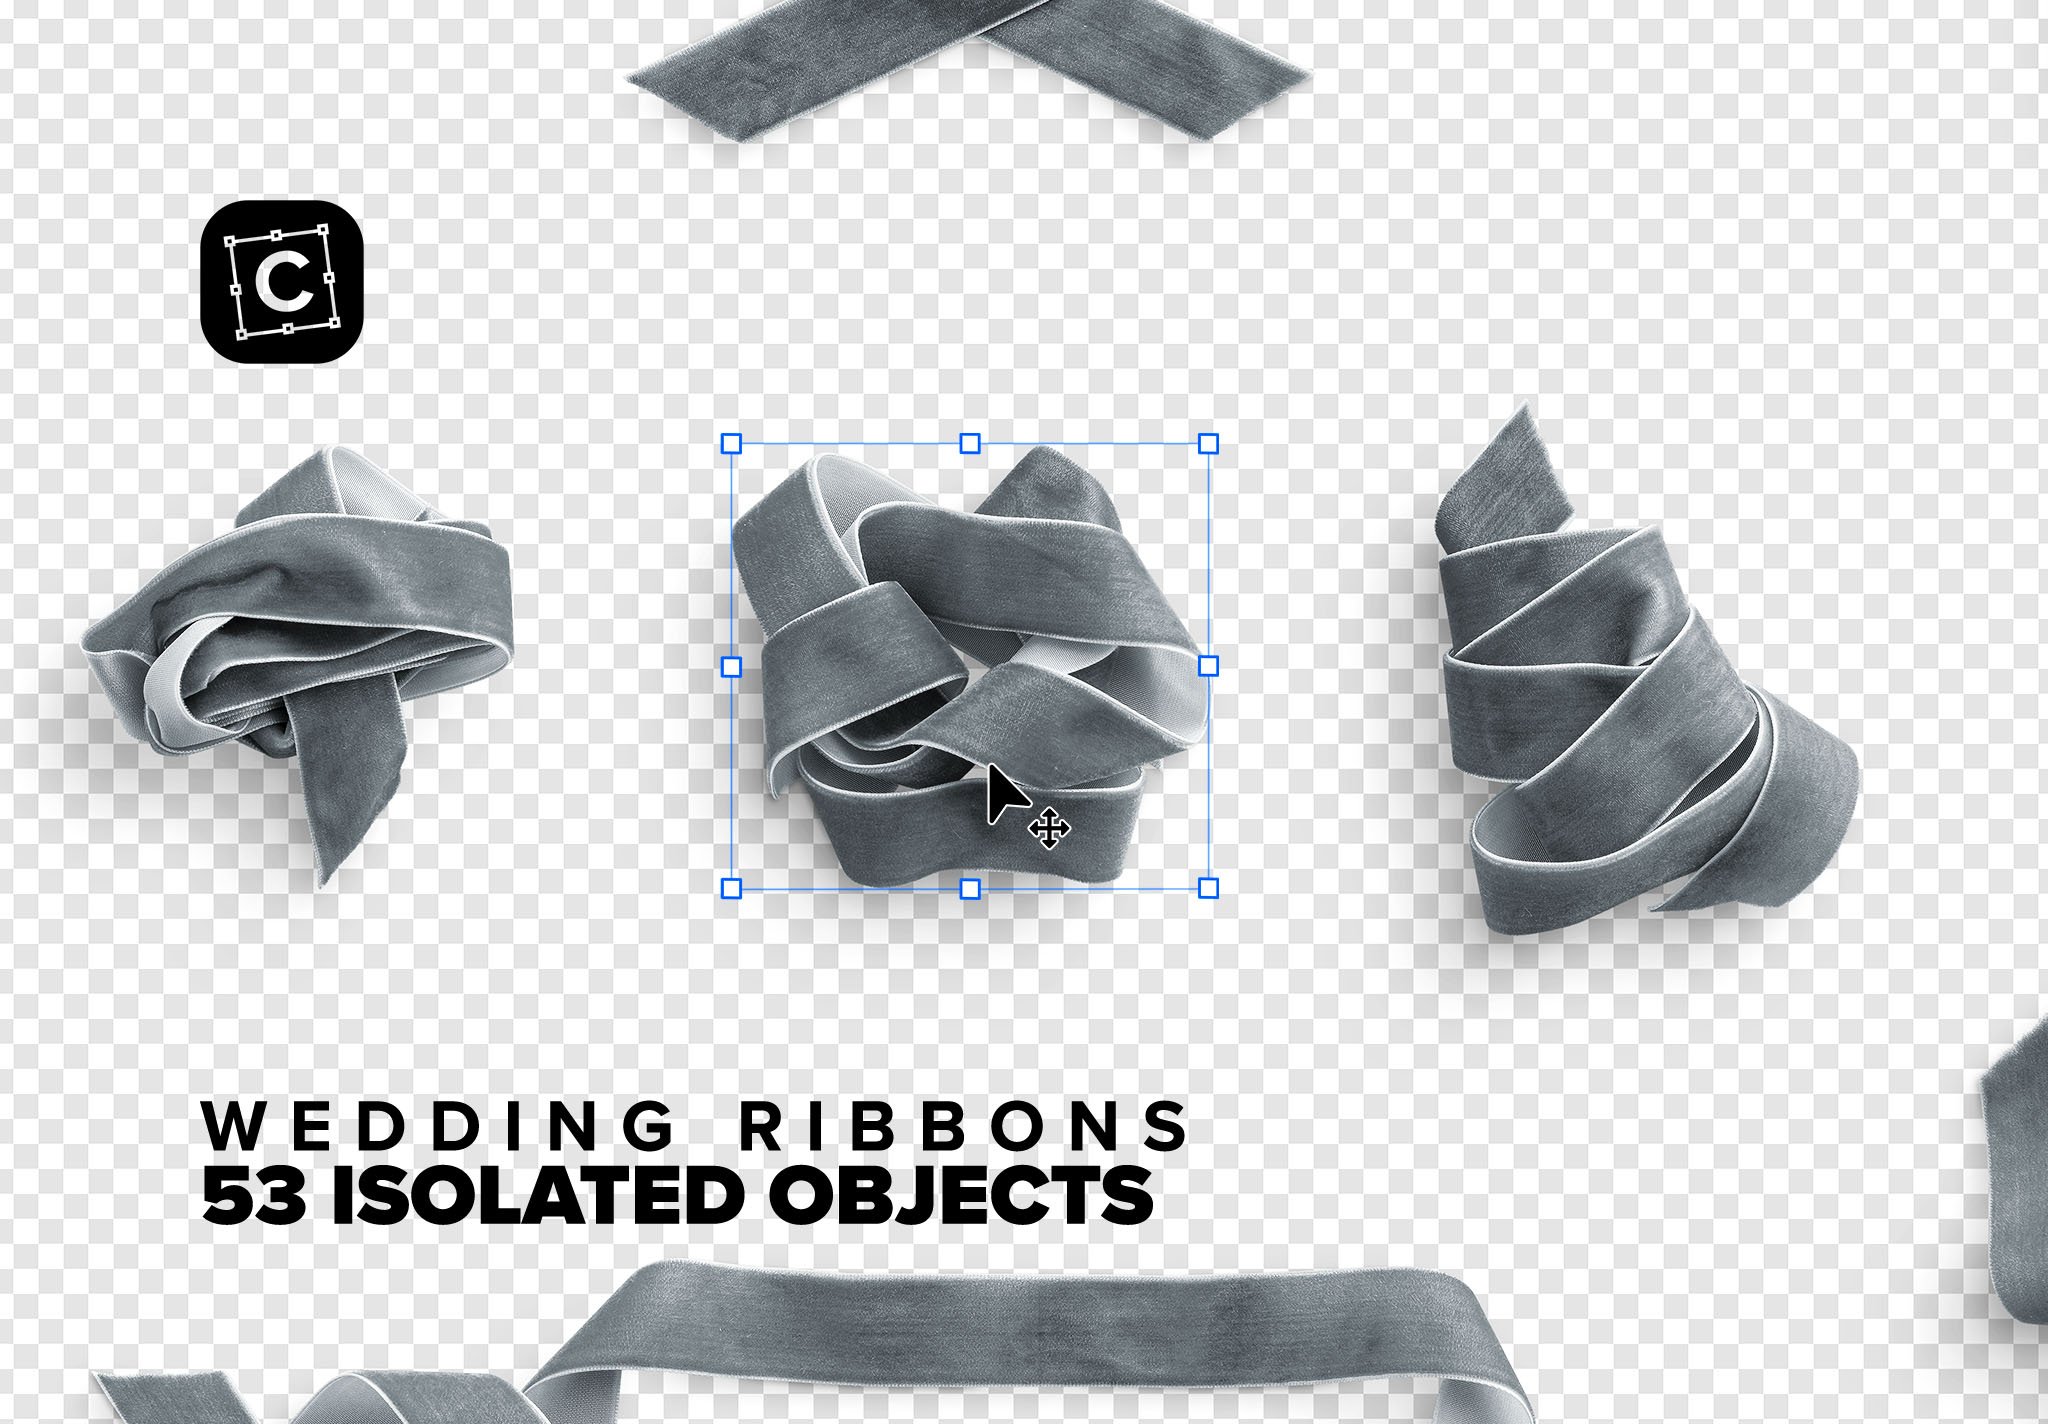 wedding ribbons 03 isolated objects 133